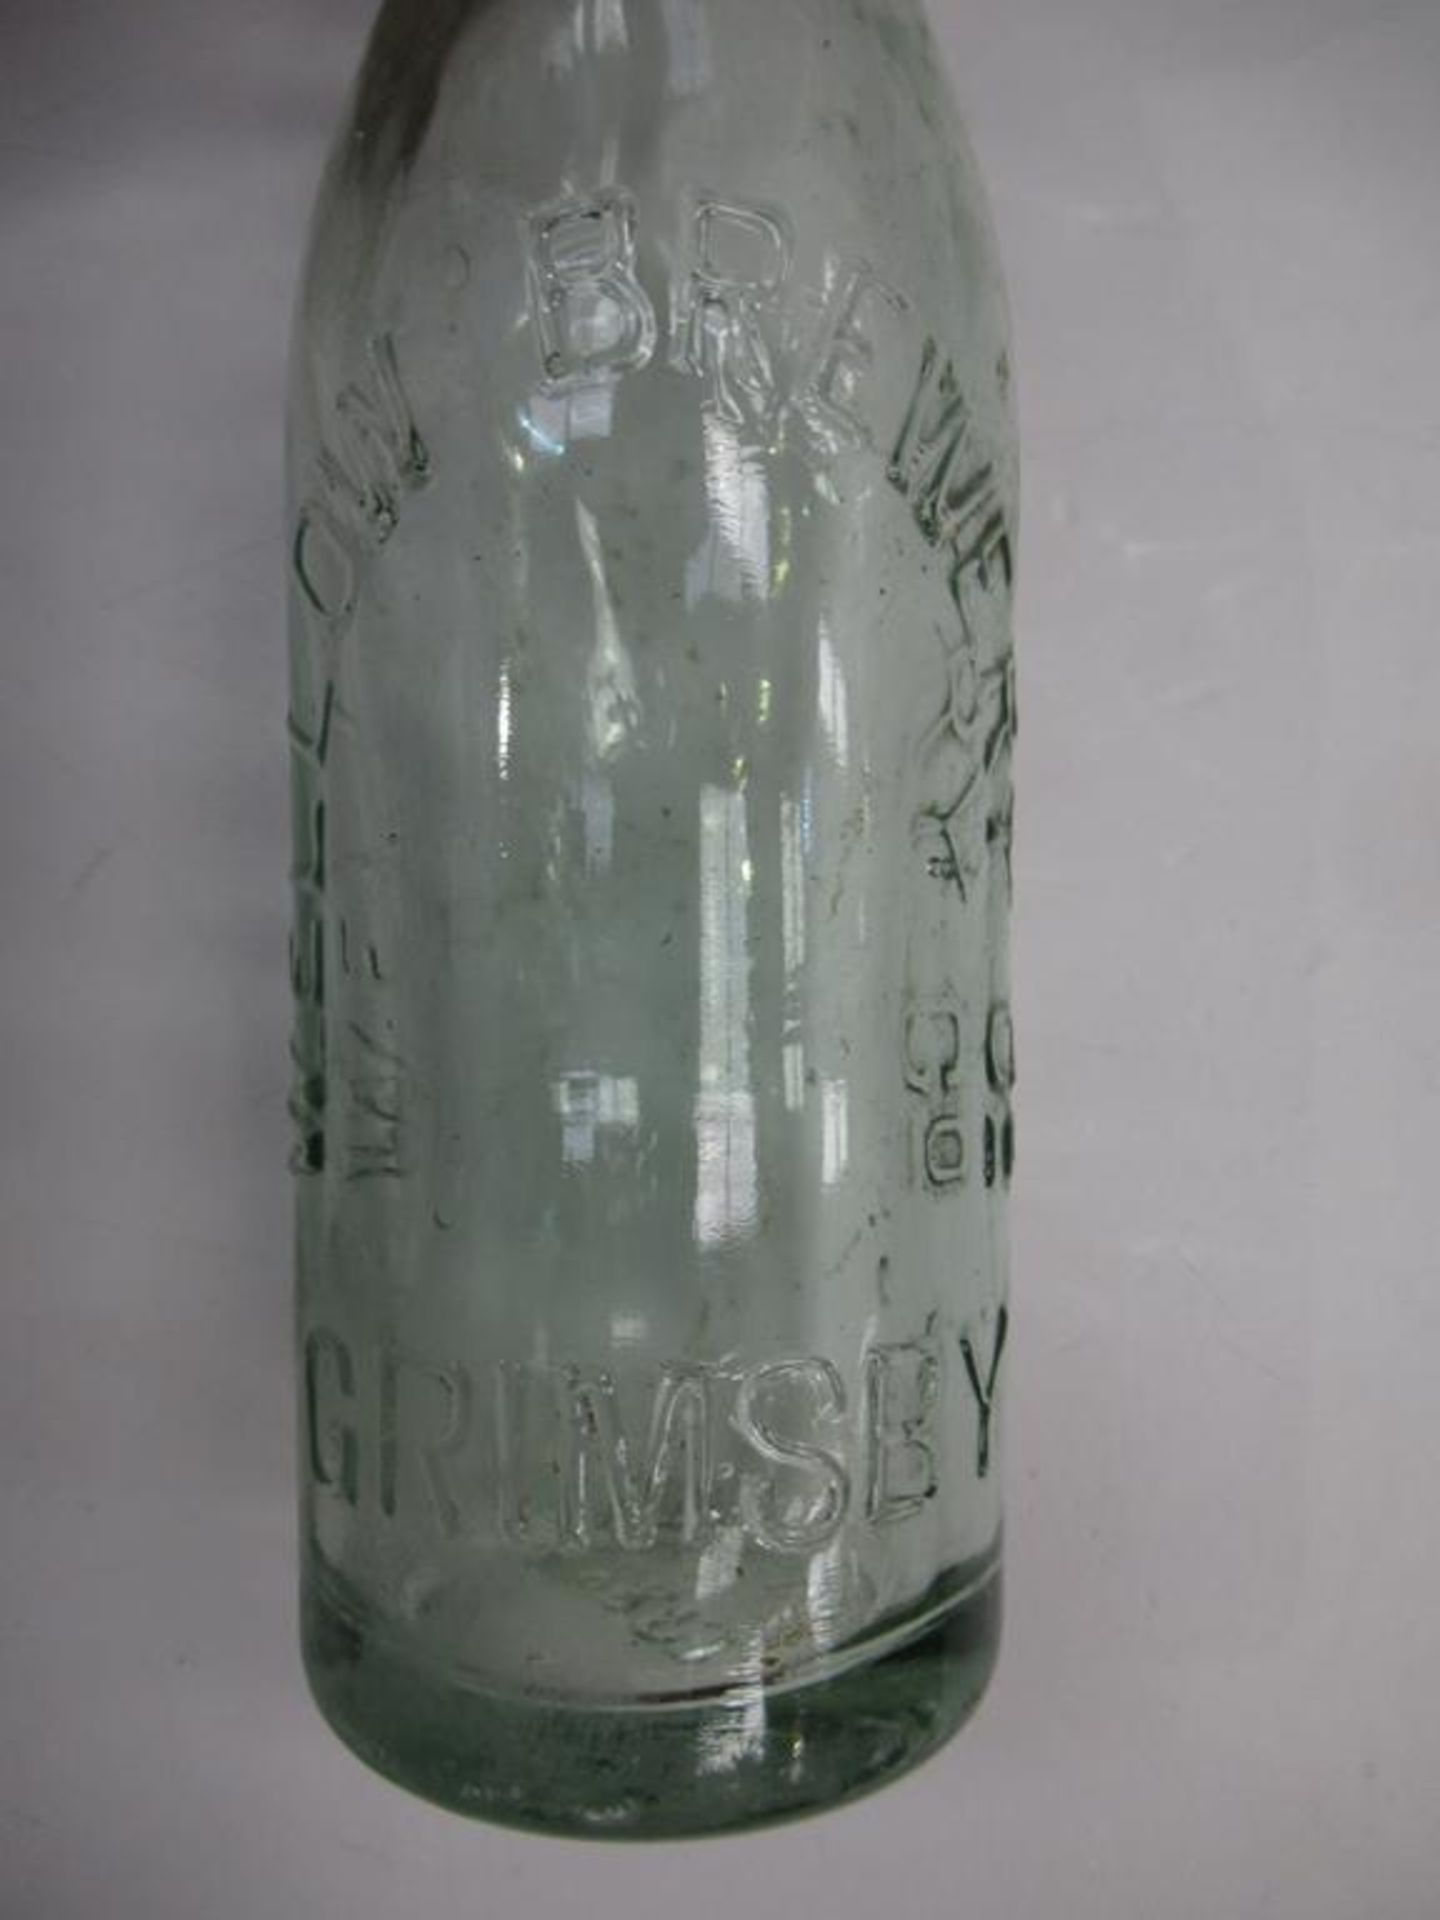 7x Grimsby Wellow Brewery bottles (5x coloured, 3x with matching stoppers) - Image 23 of 29